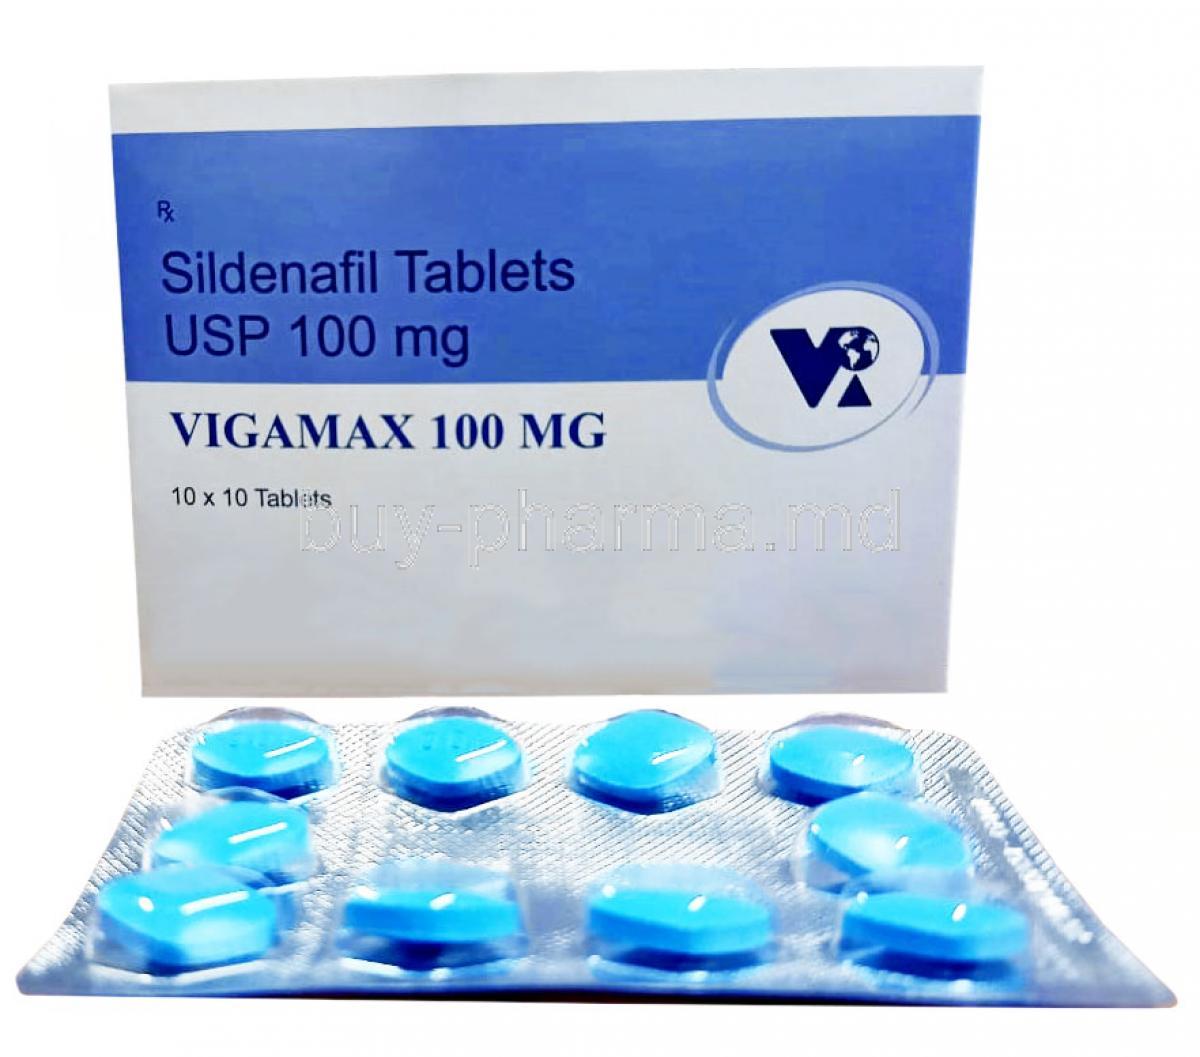 Vigamax,Sildenafil 100mg, VEA Impex, Box and Blisterpack